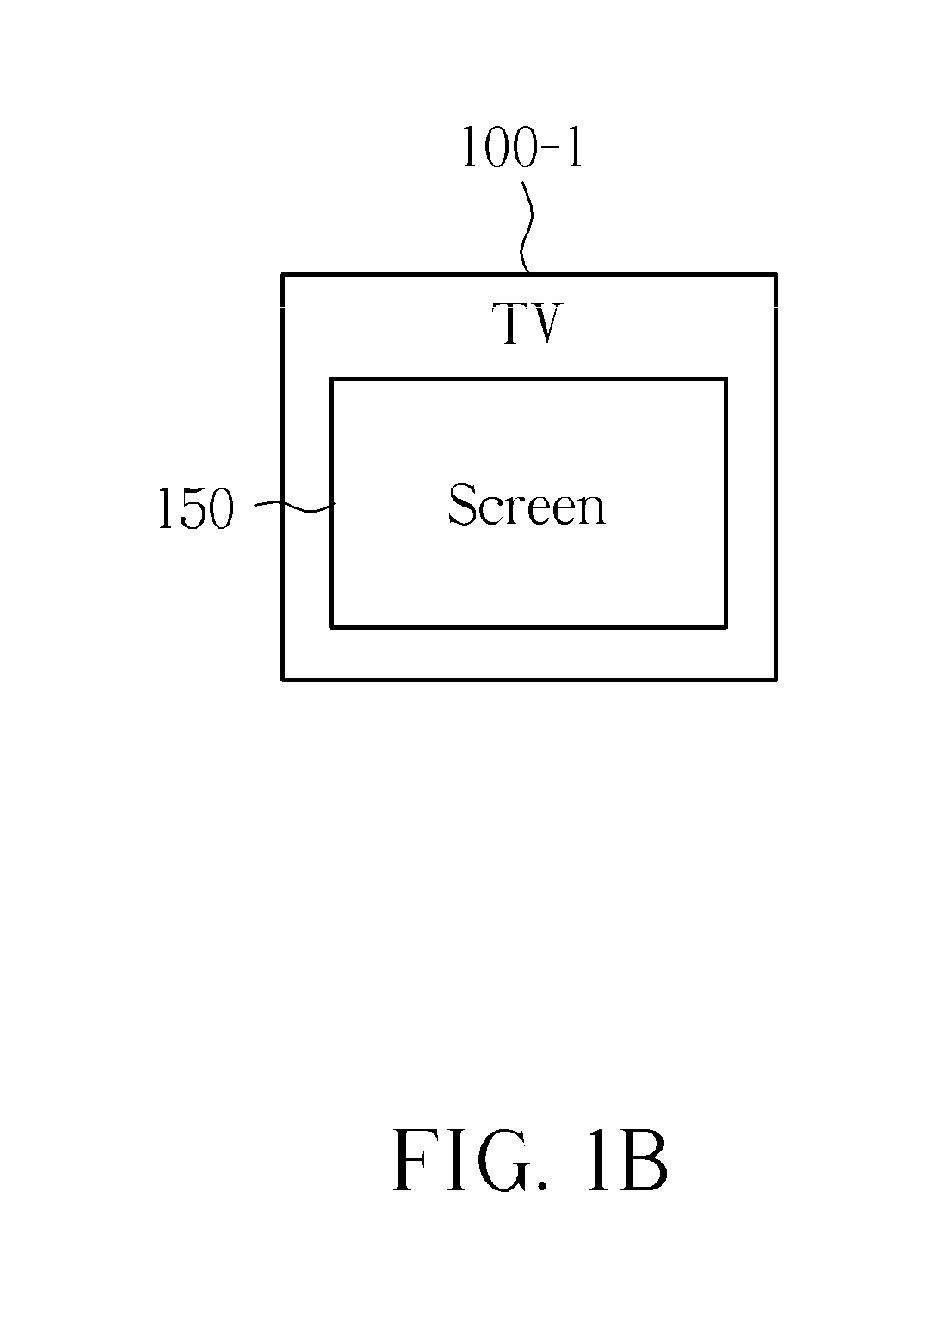 Method for performing schedule control of a multichannel broadcasting program receiver, and associated apparatus